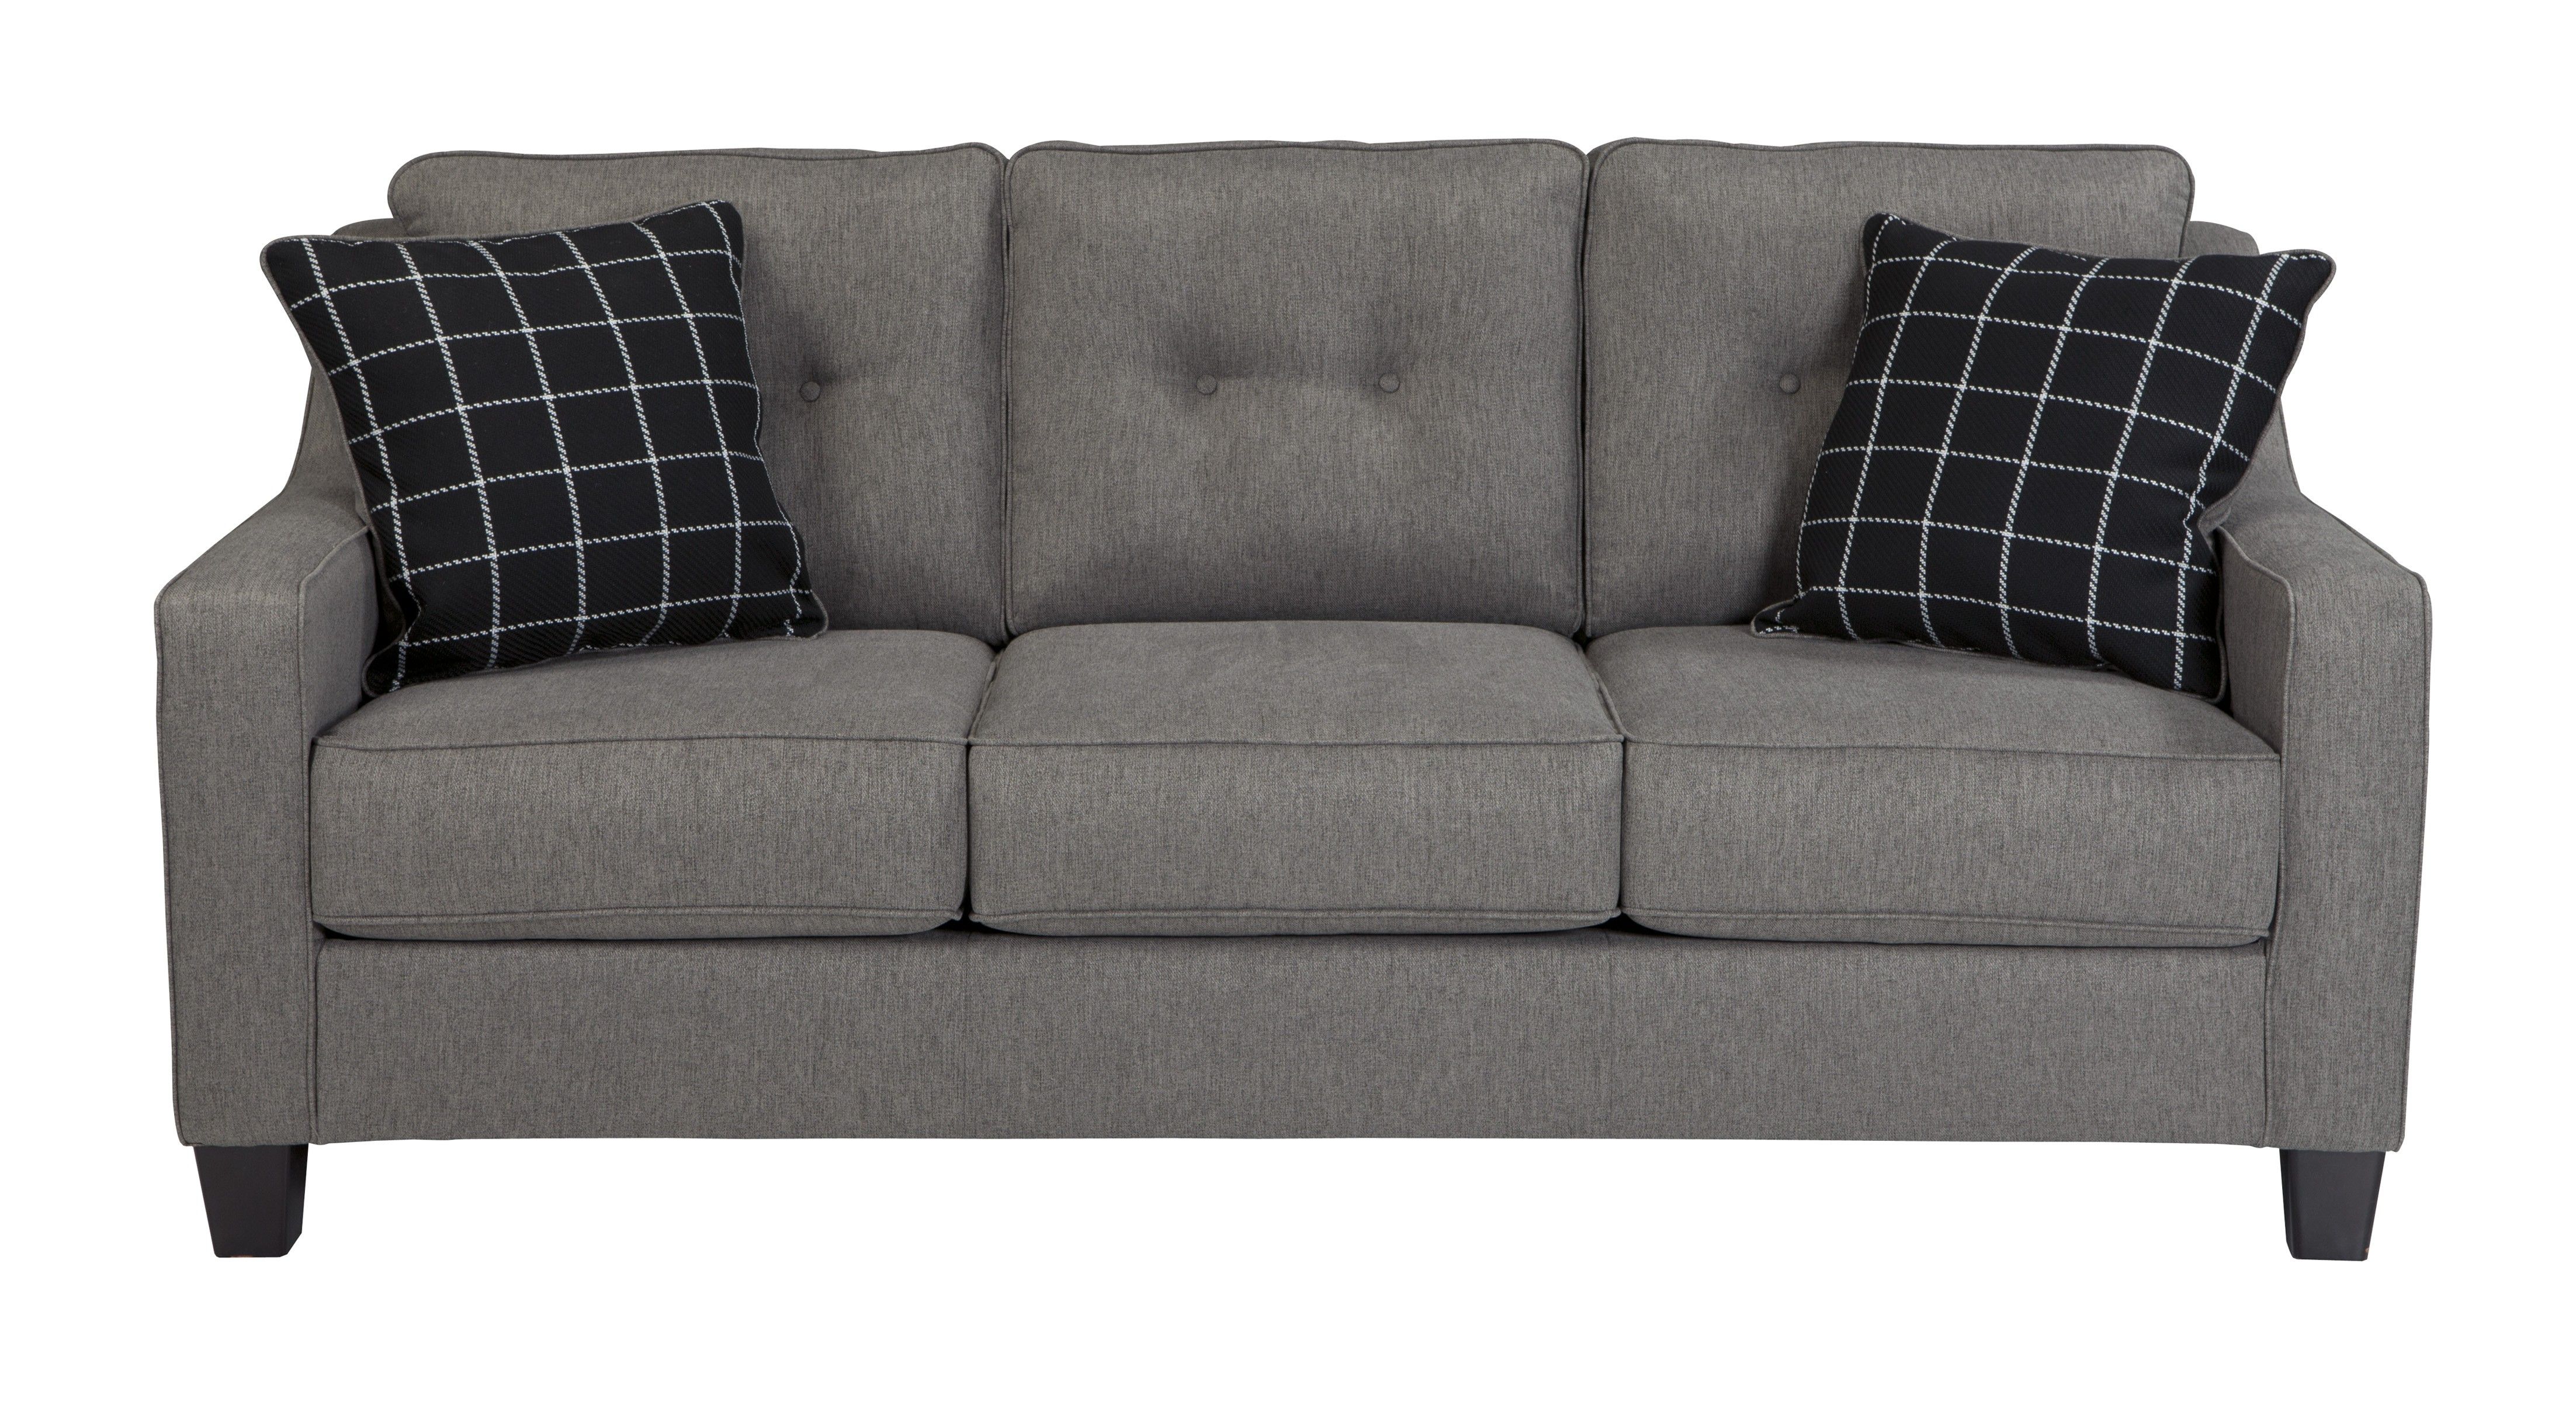 Ashley 5390138 Brindon Contemporary Sofa In Charcoal Fabric Upholstery In Ashley Tufted Sofa (Photo 10 of 12)